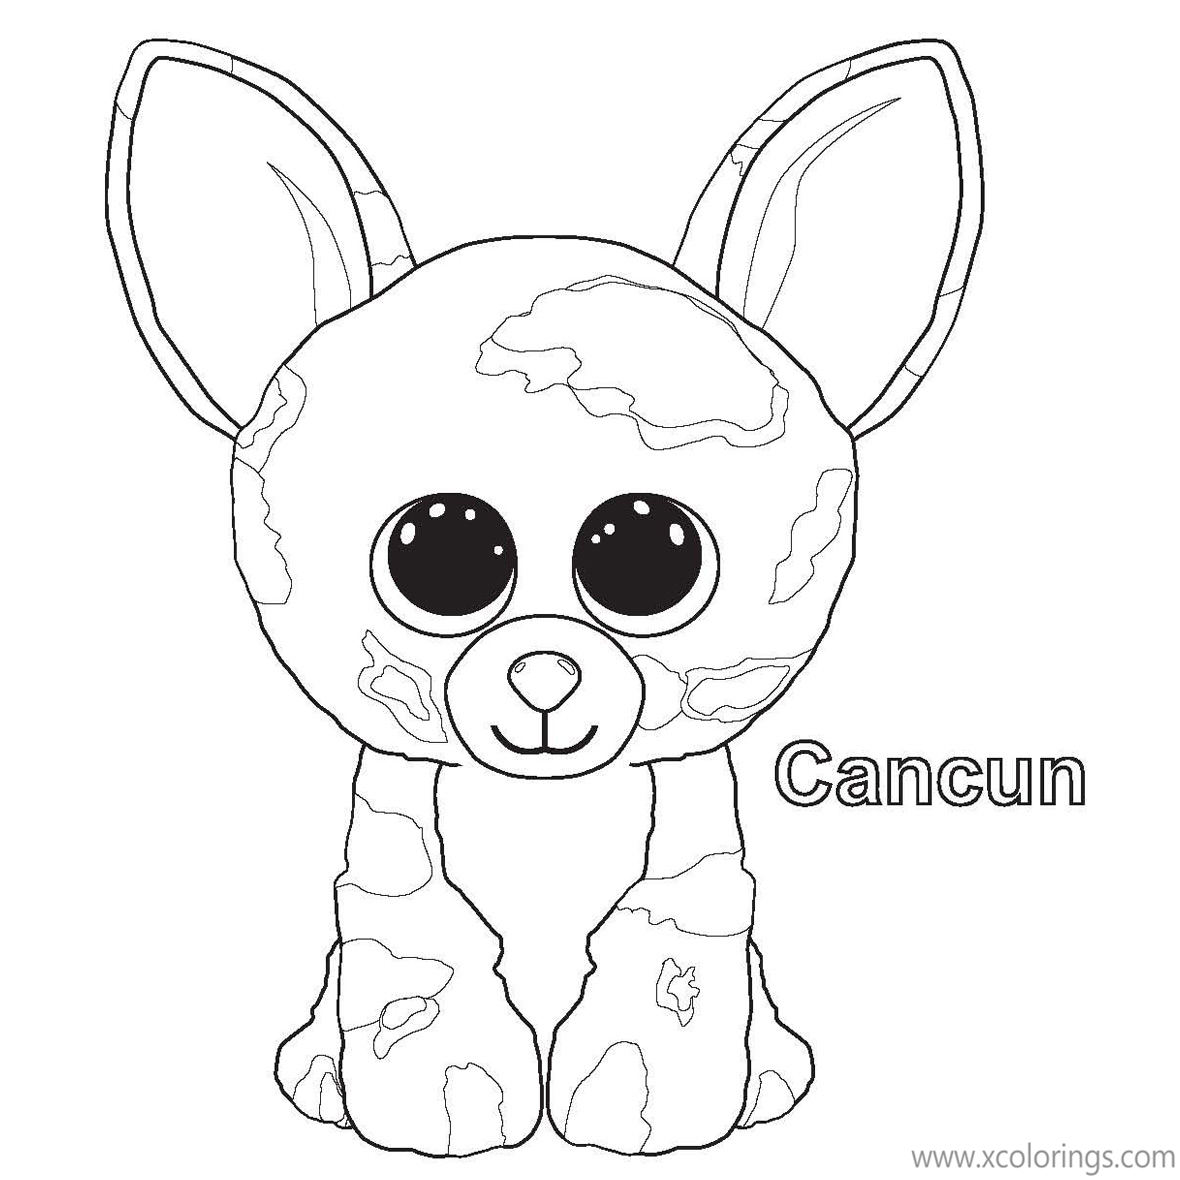 Free Beanie Boos Coloring Pages Cancun printable